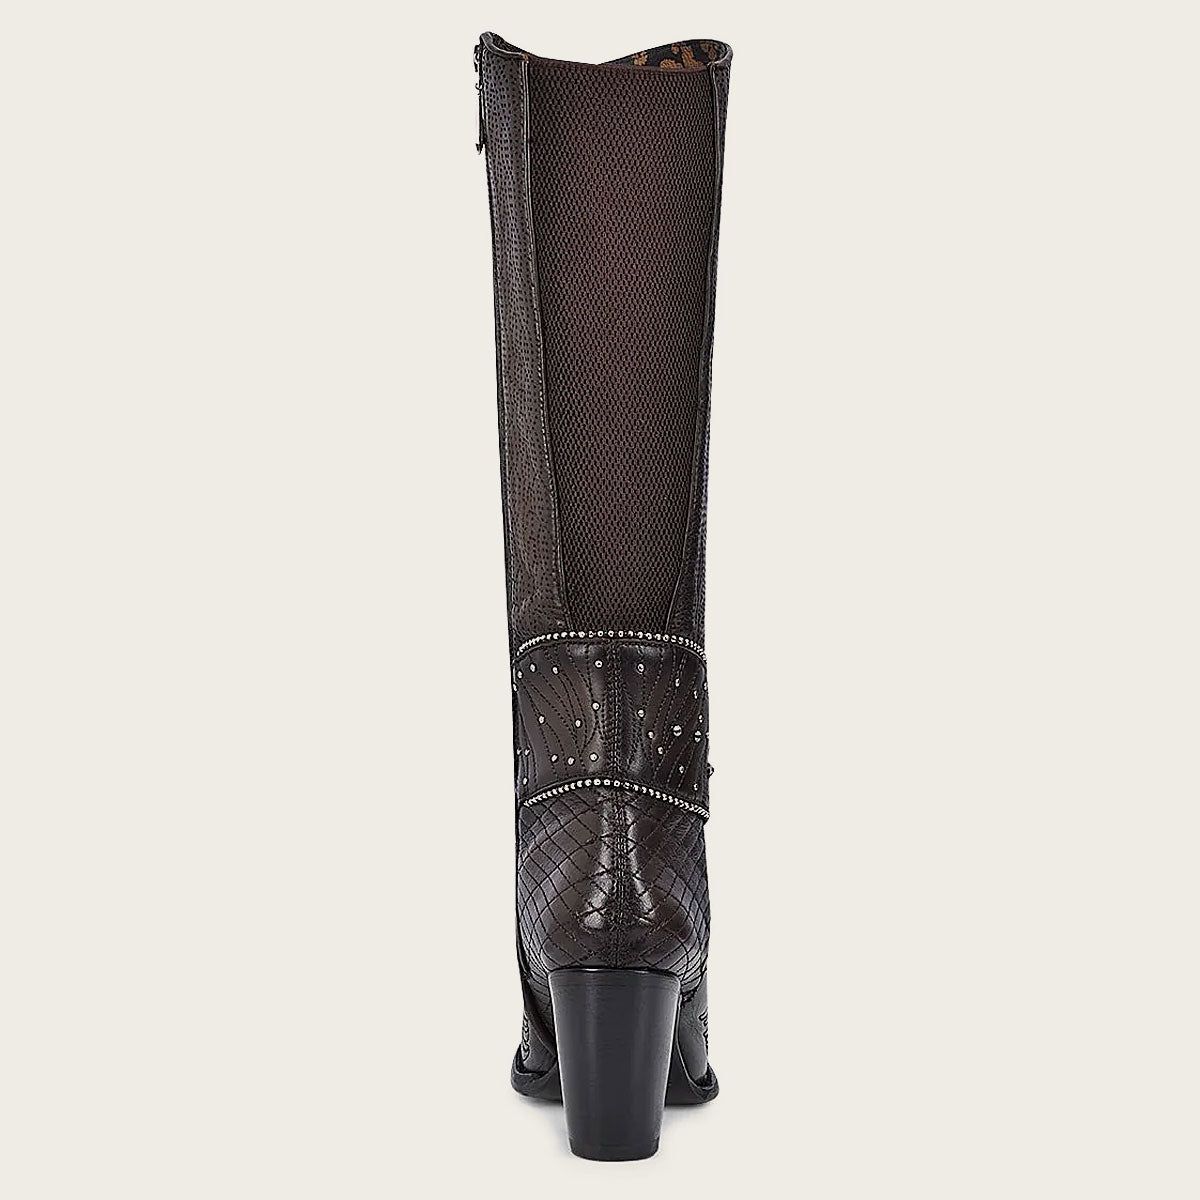 Dark brown leather boot with intricate embroidery and sparkling Austrian crystals